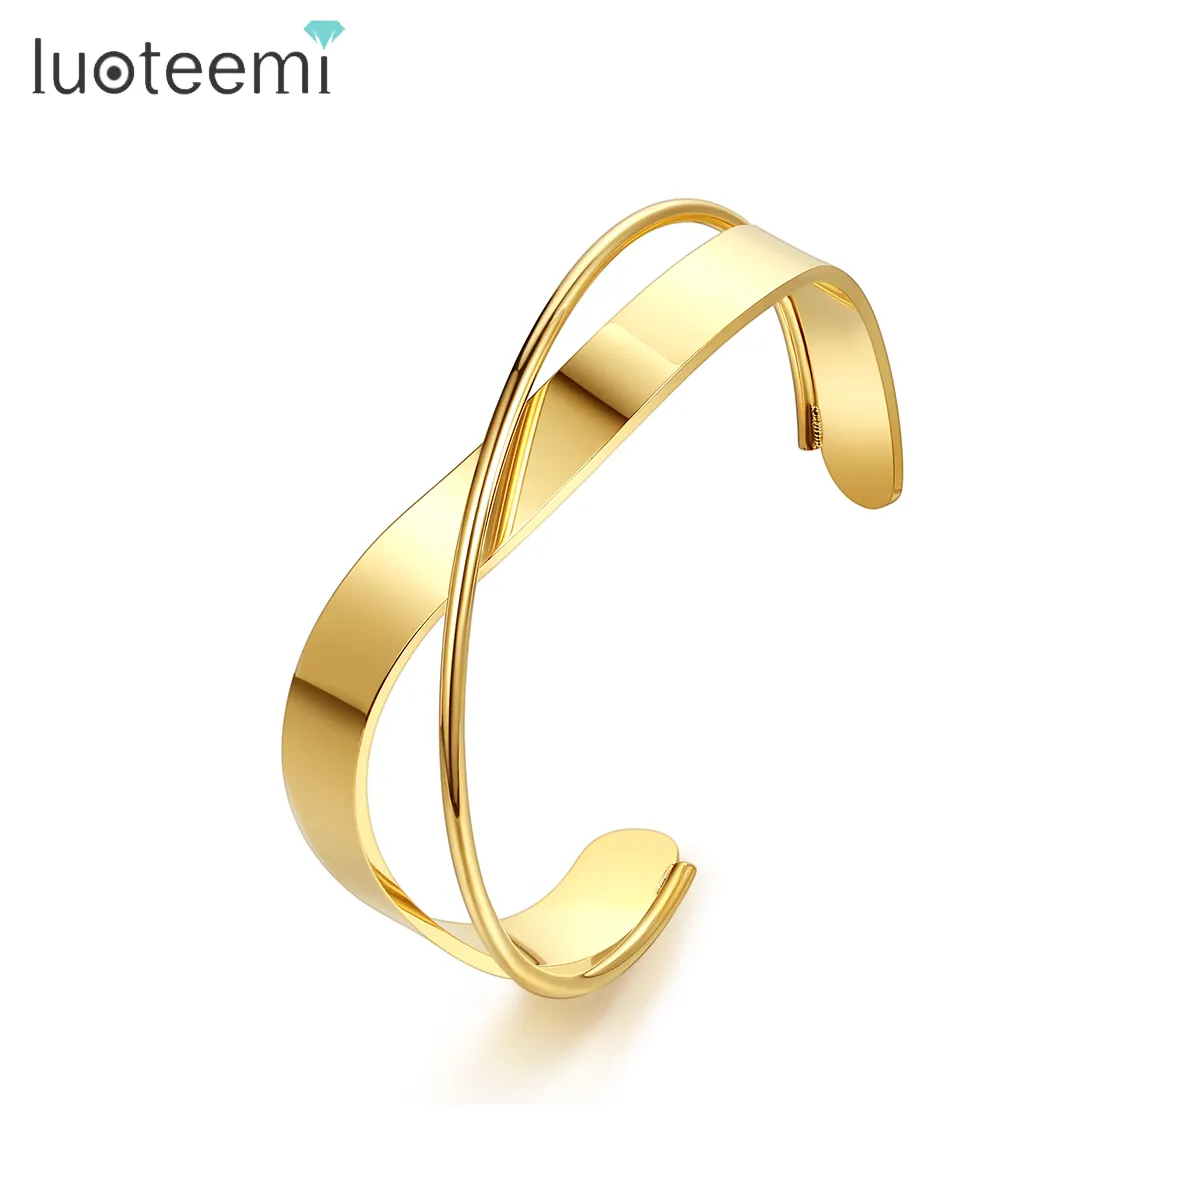 SP-LAM Gold Plated Wide Cuff Bracelet Female Fashion Designer Stainless Steel Bangle Jewelry Woman